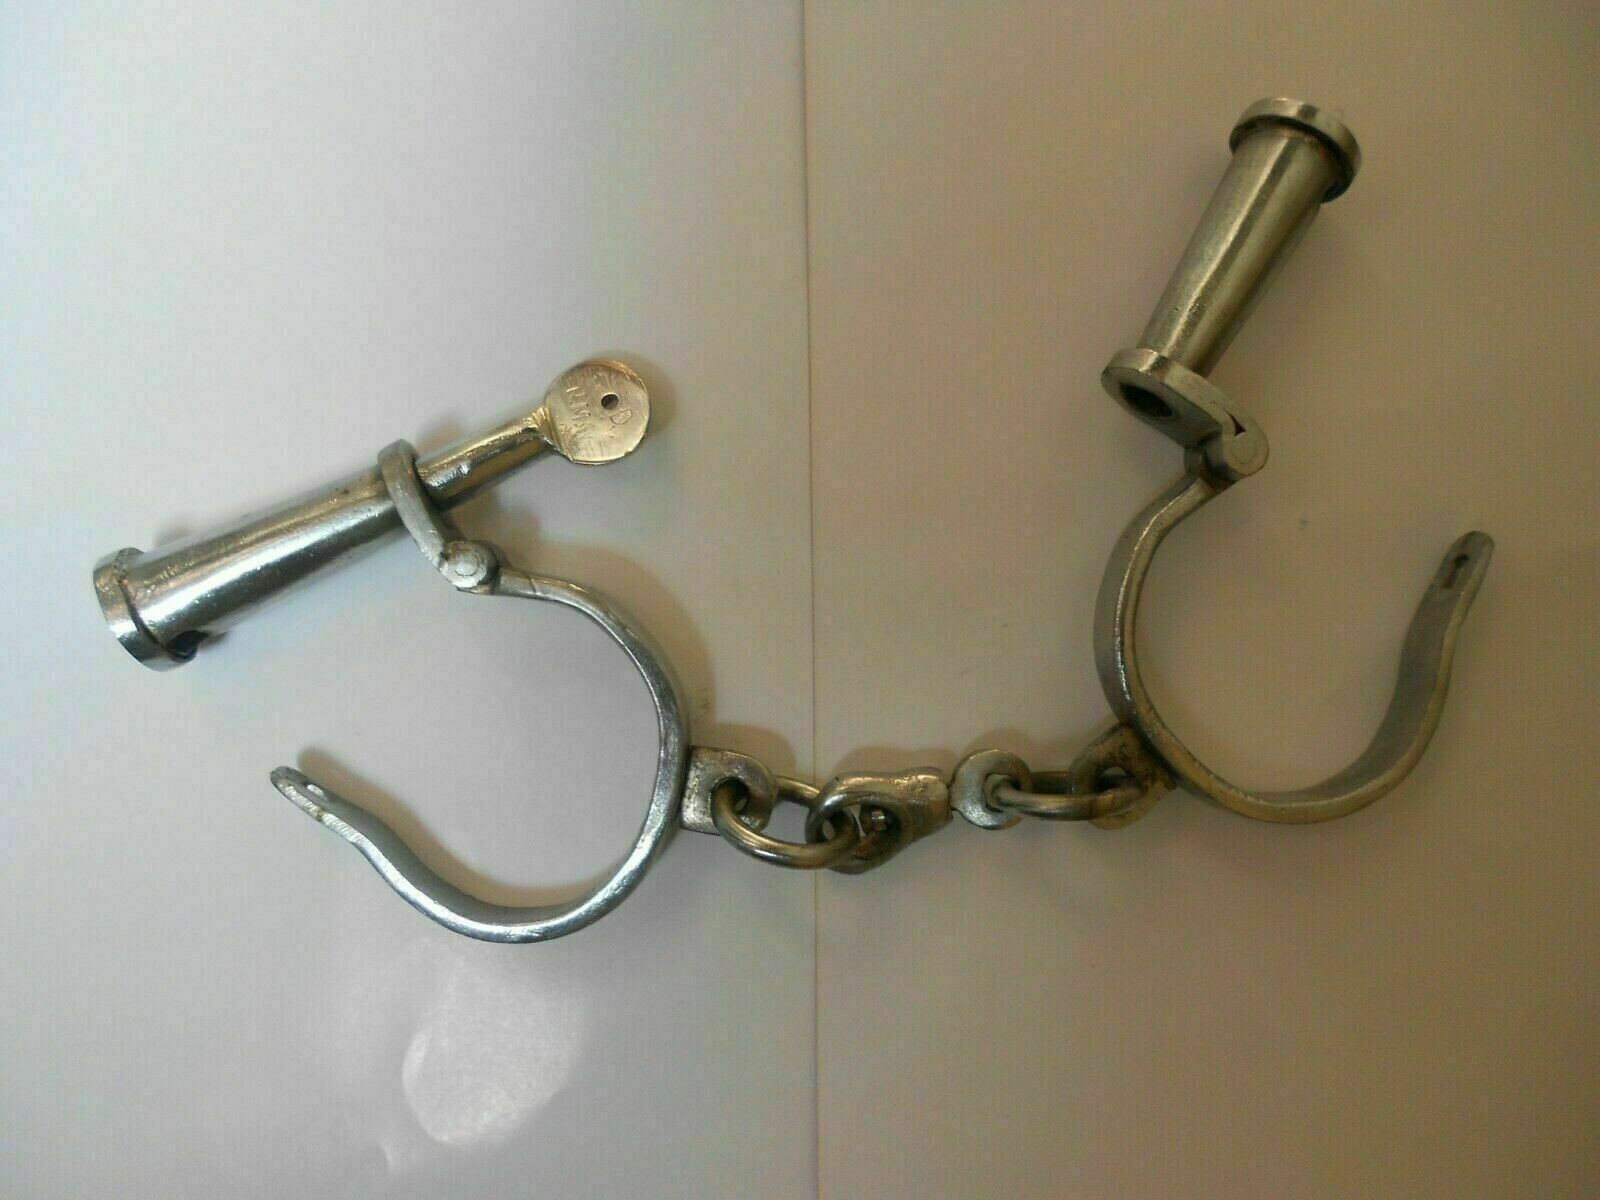 New Antique Handcuffs  Style police Shackles-Props Iron Handcuff with key